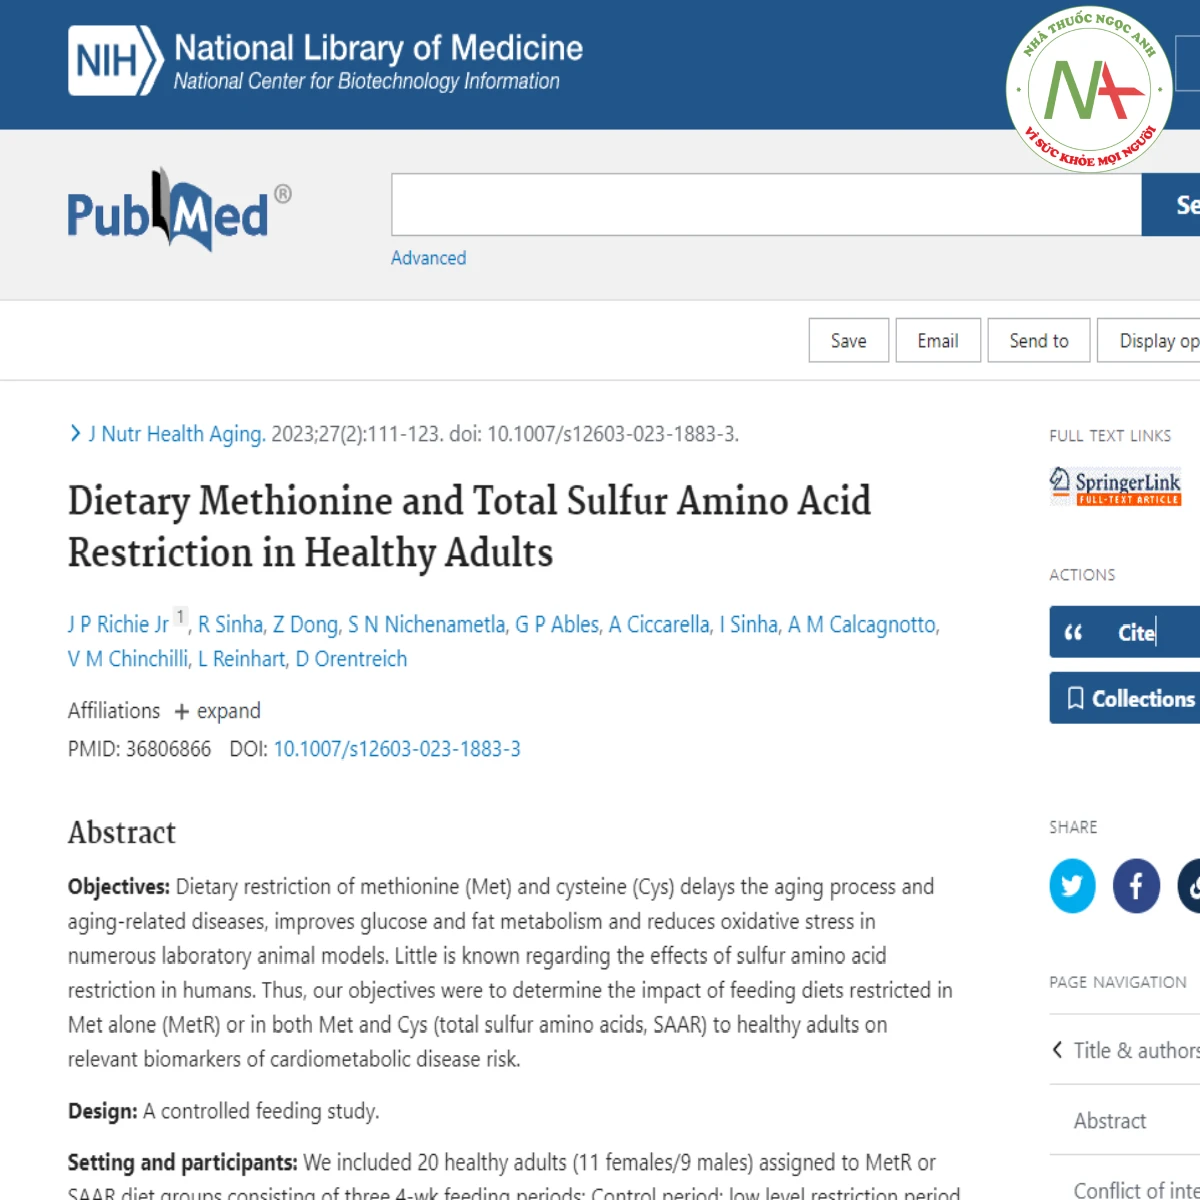 Dietary Methionine and Total Sulfur Amino Acid Restriction in Healthy Adults